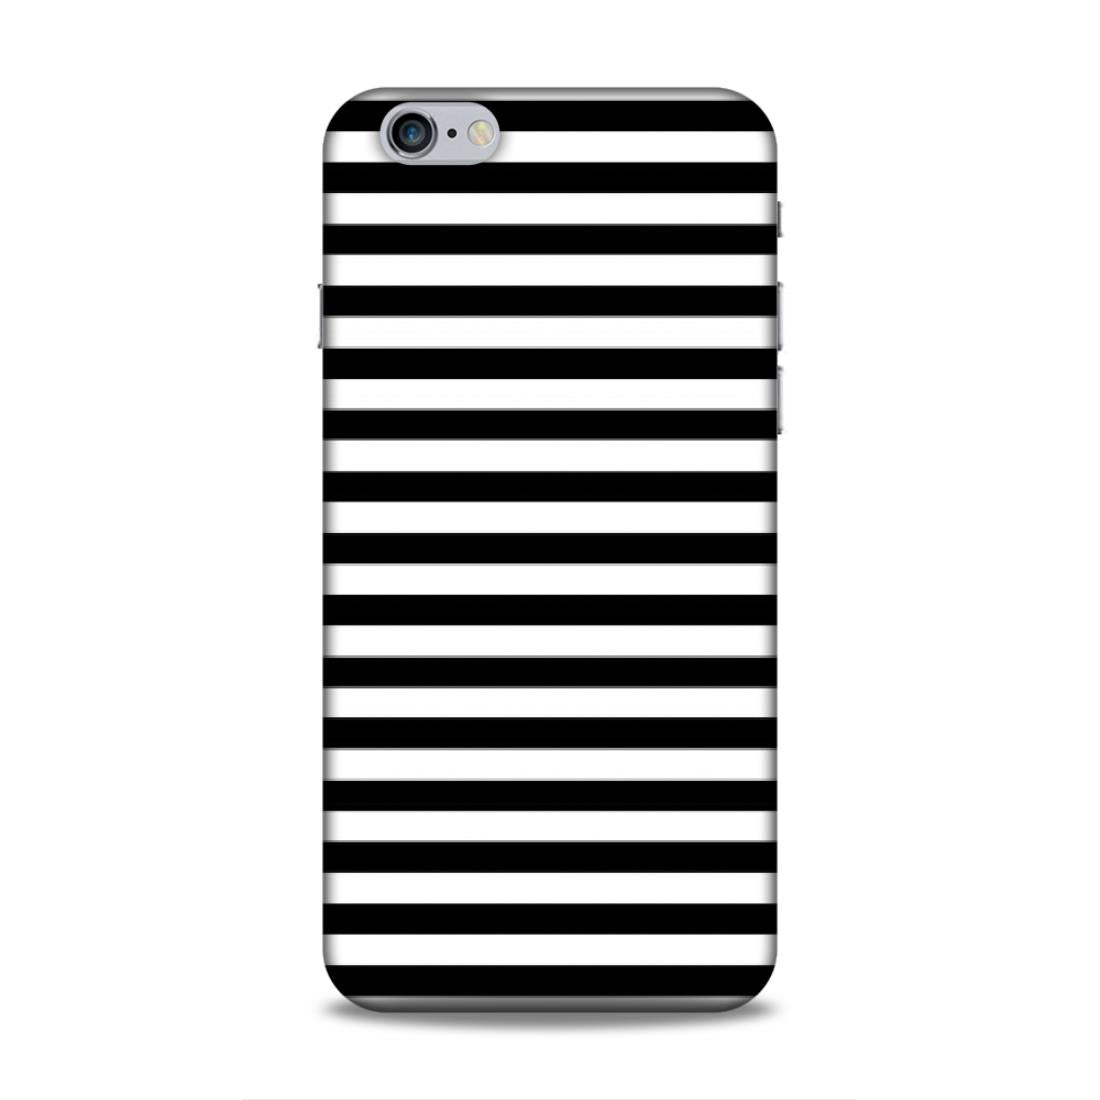 Black and White Line Hard Back Case For Apple iPhone 6 Plus / 6s Plus